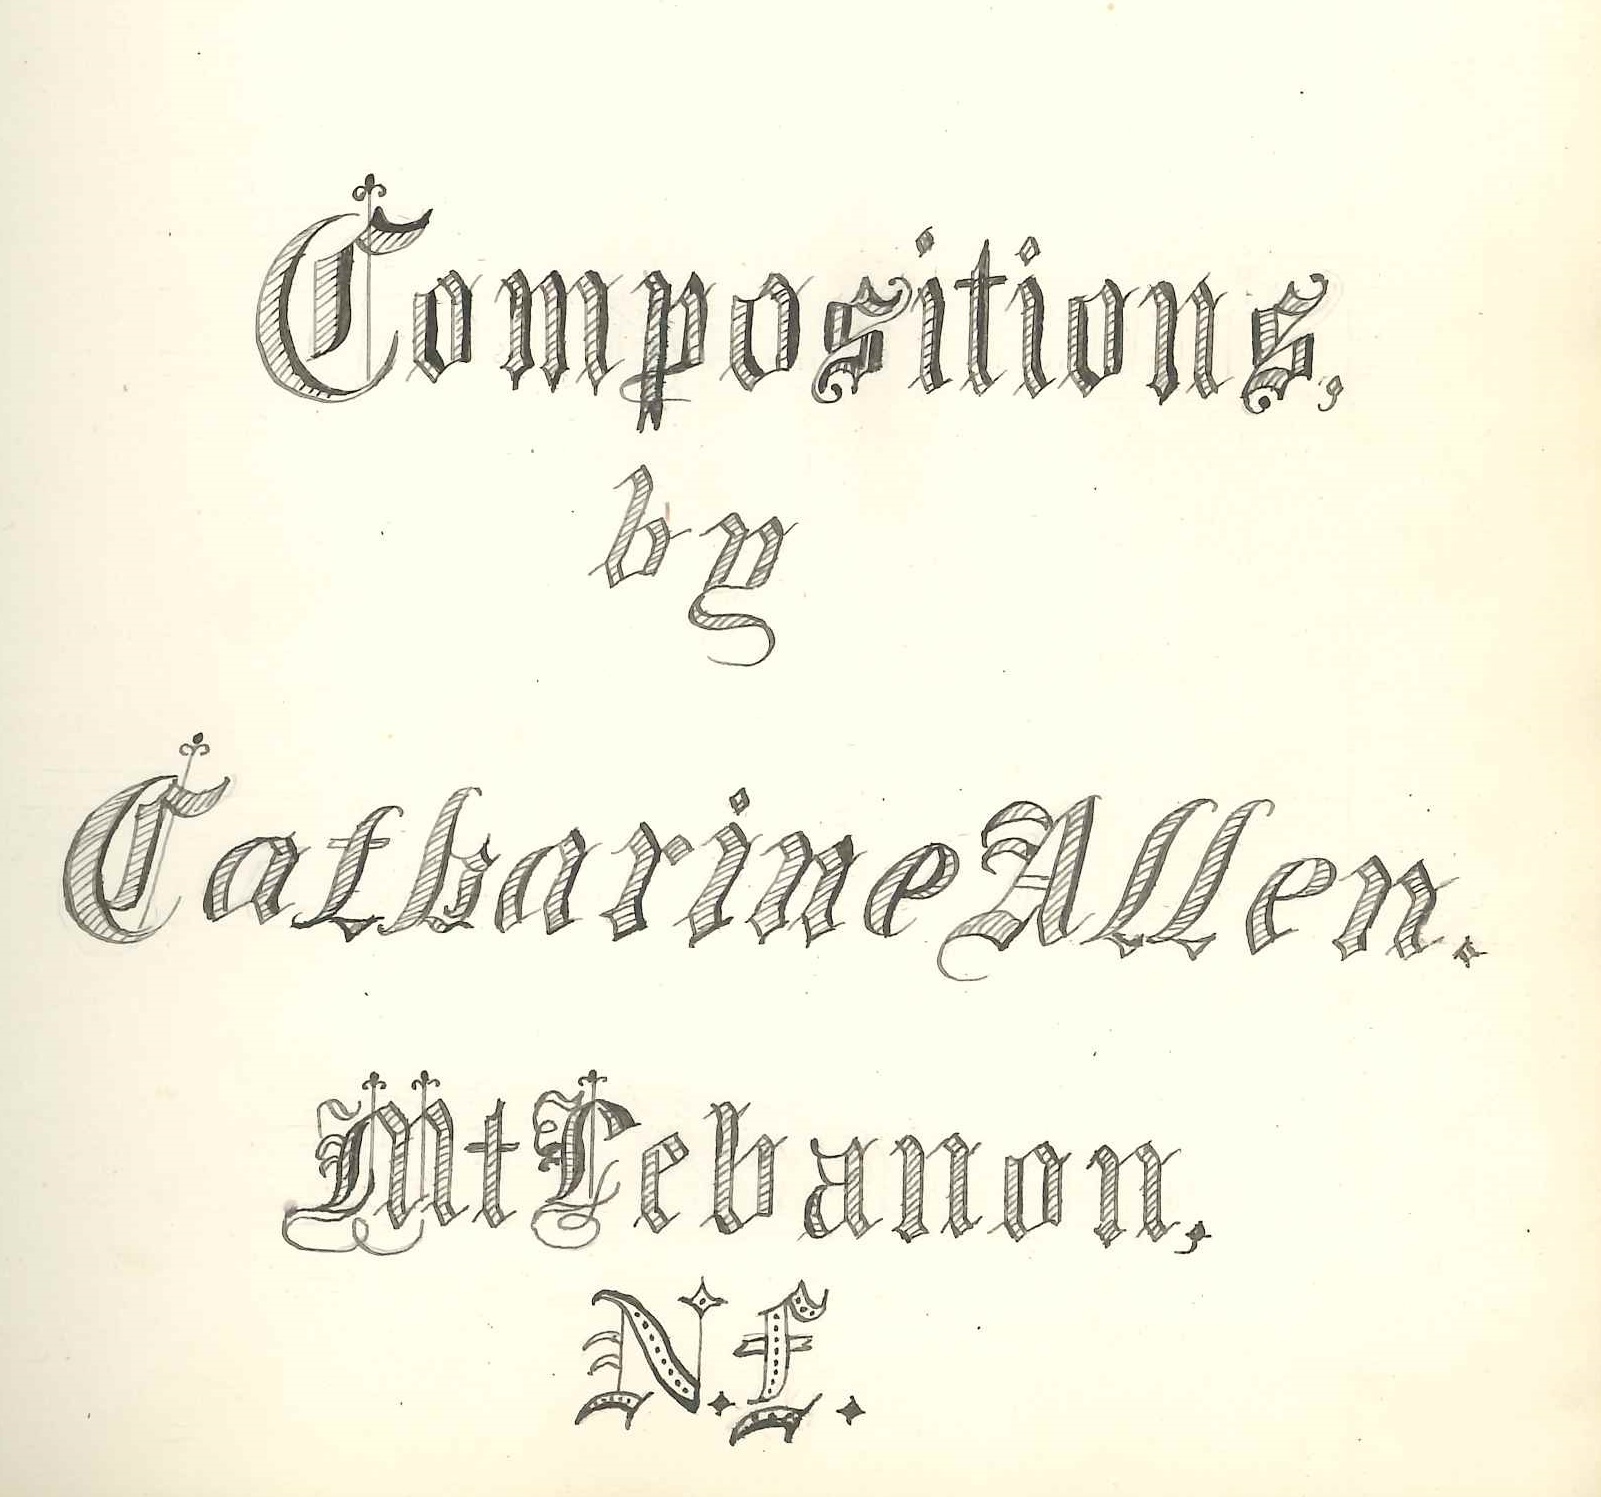 Compositions by catherine men, m bennon.